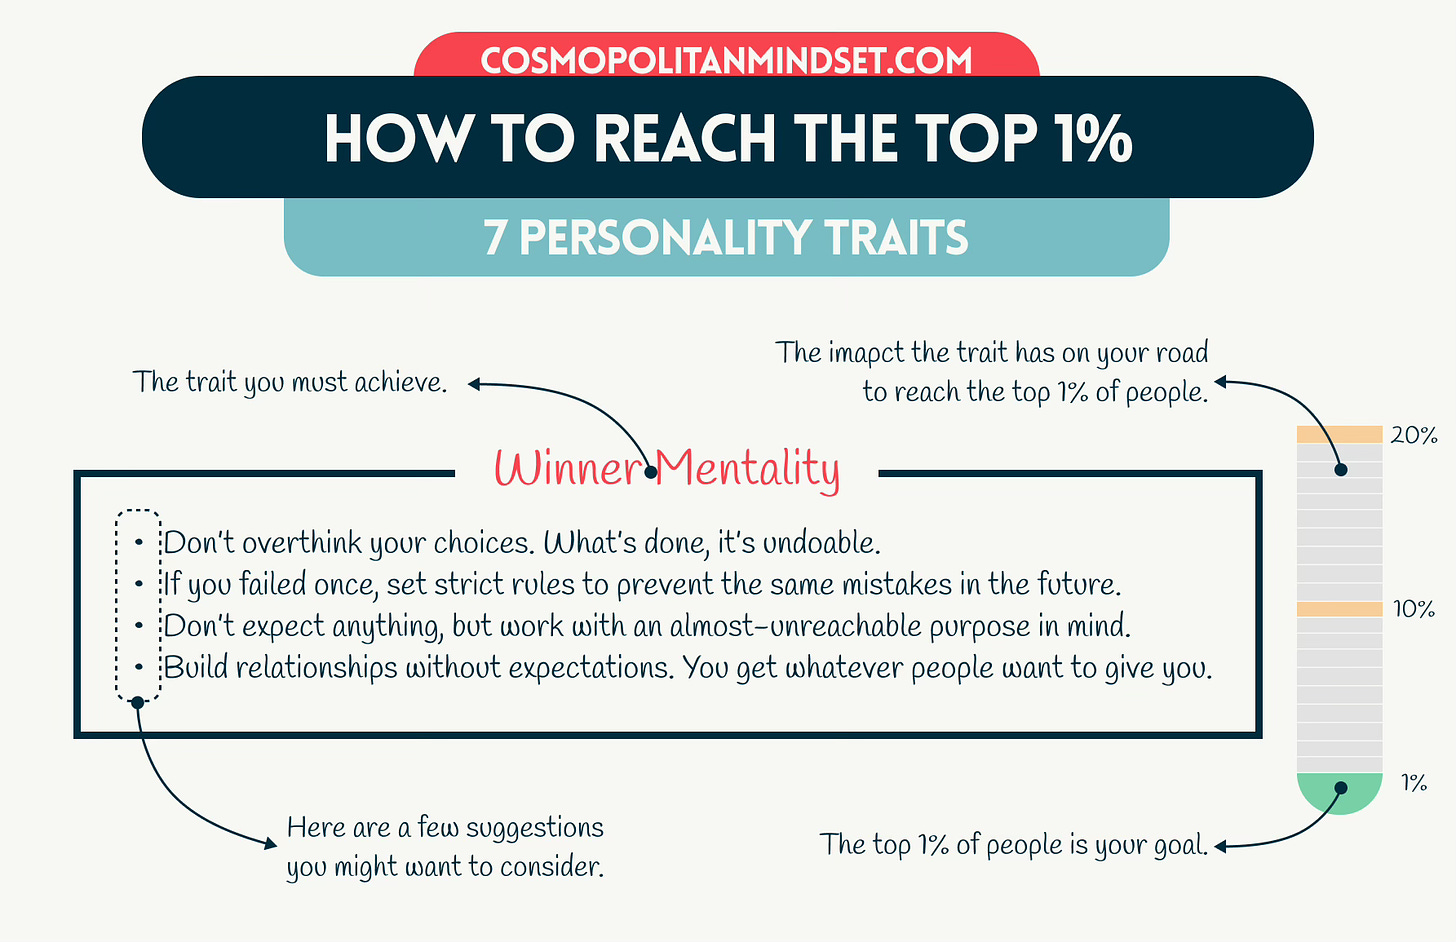 Instructions for How to Reach the Top 1% with 7 Personality Traits